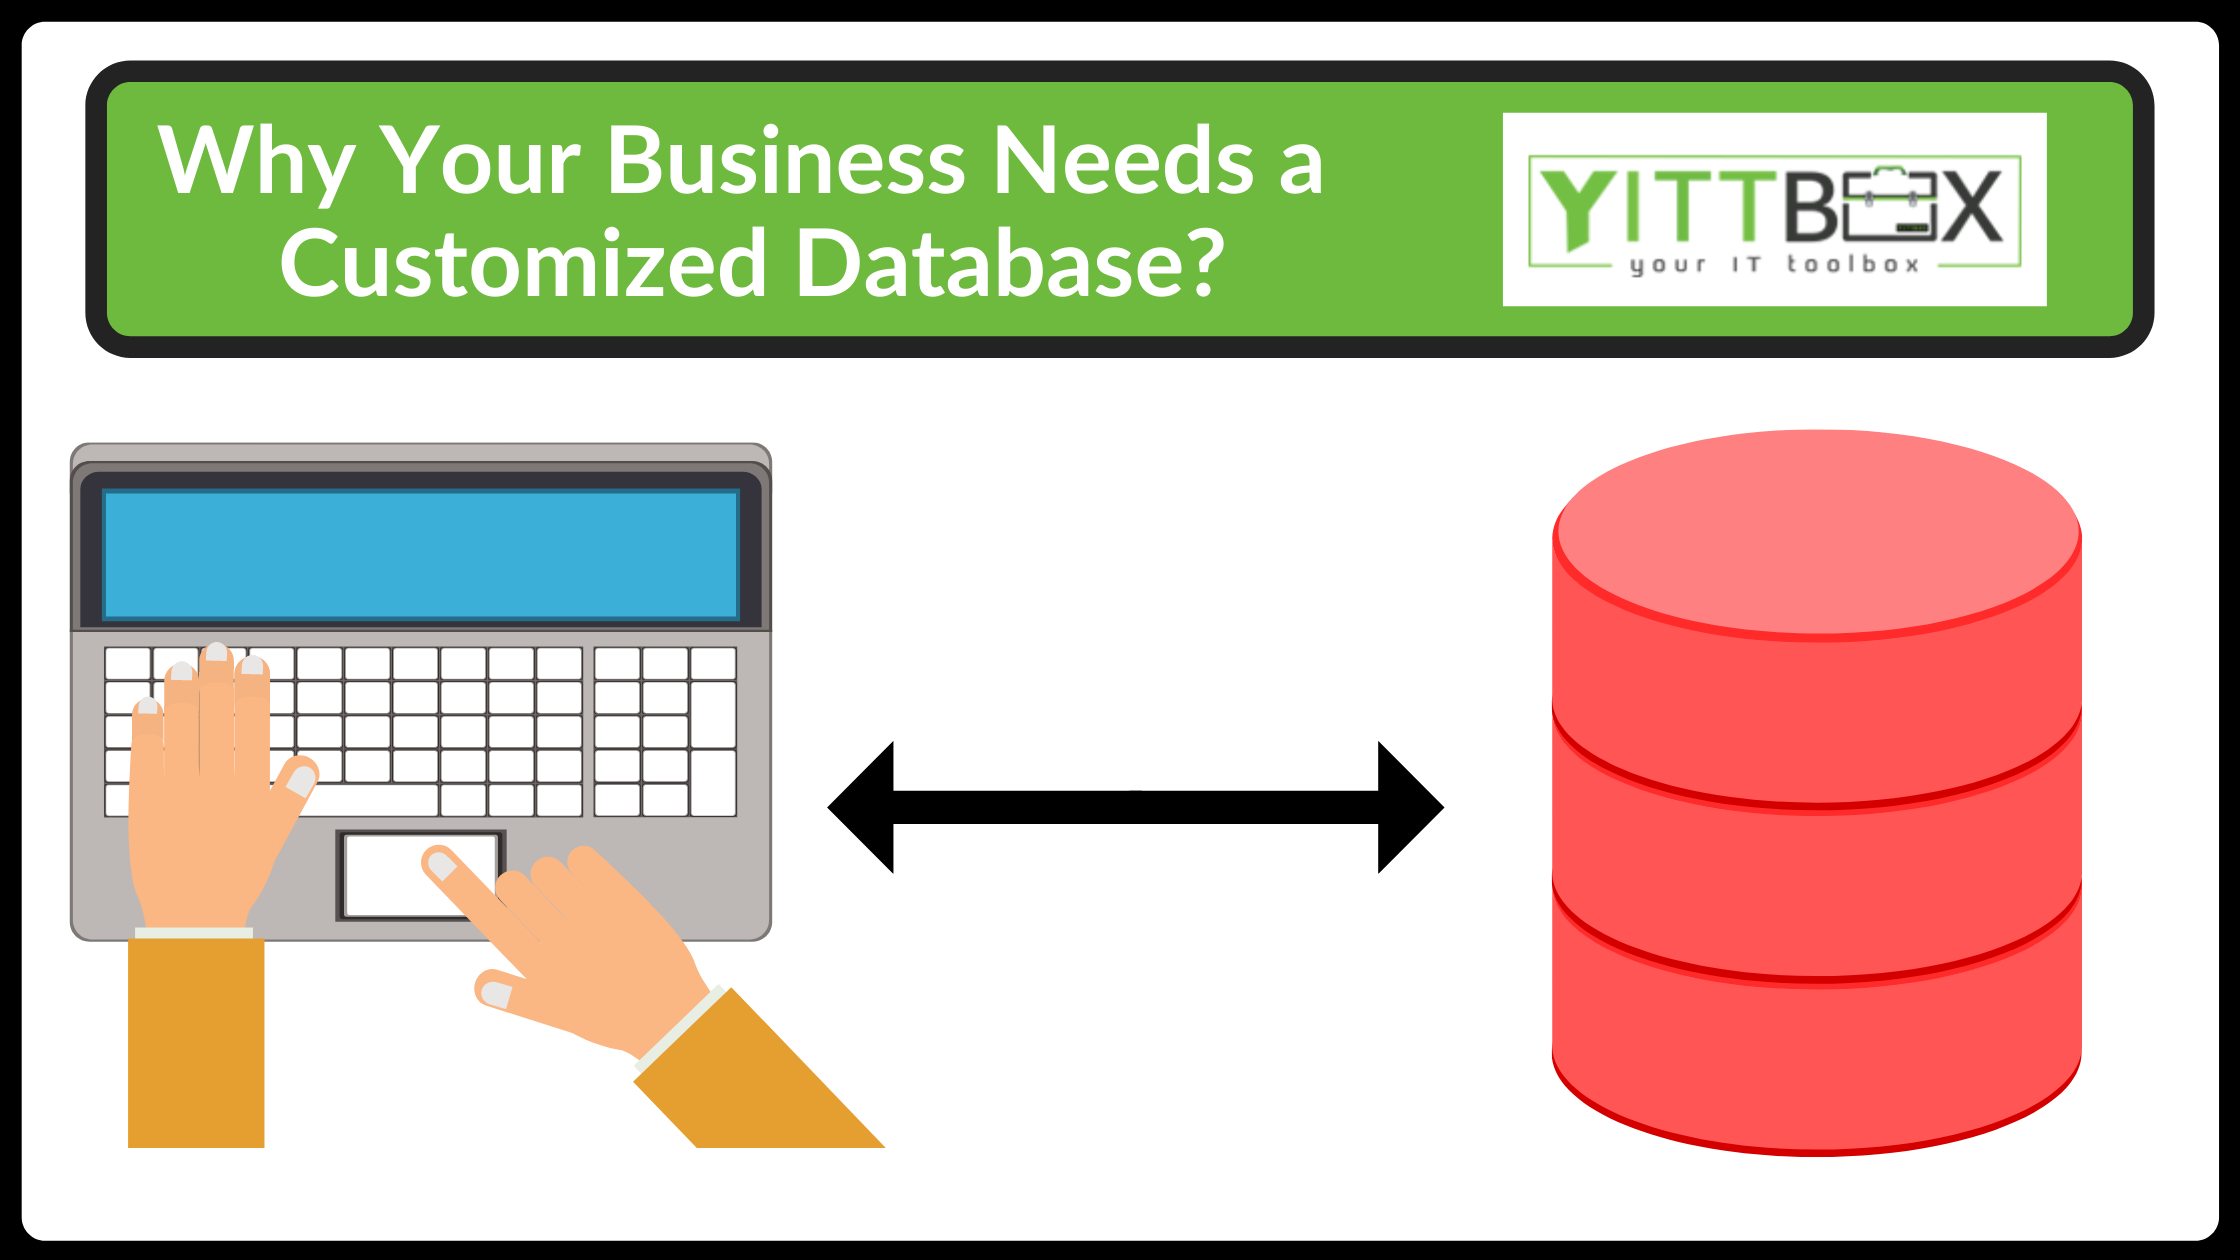 Why Your Business Needs a Customized Database?